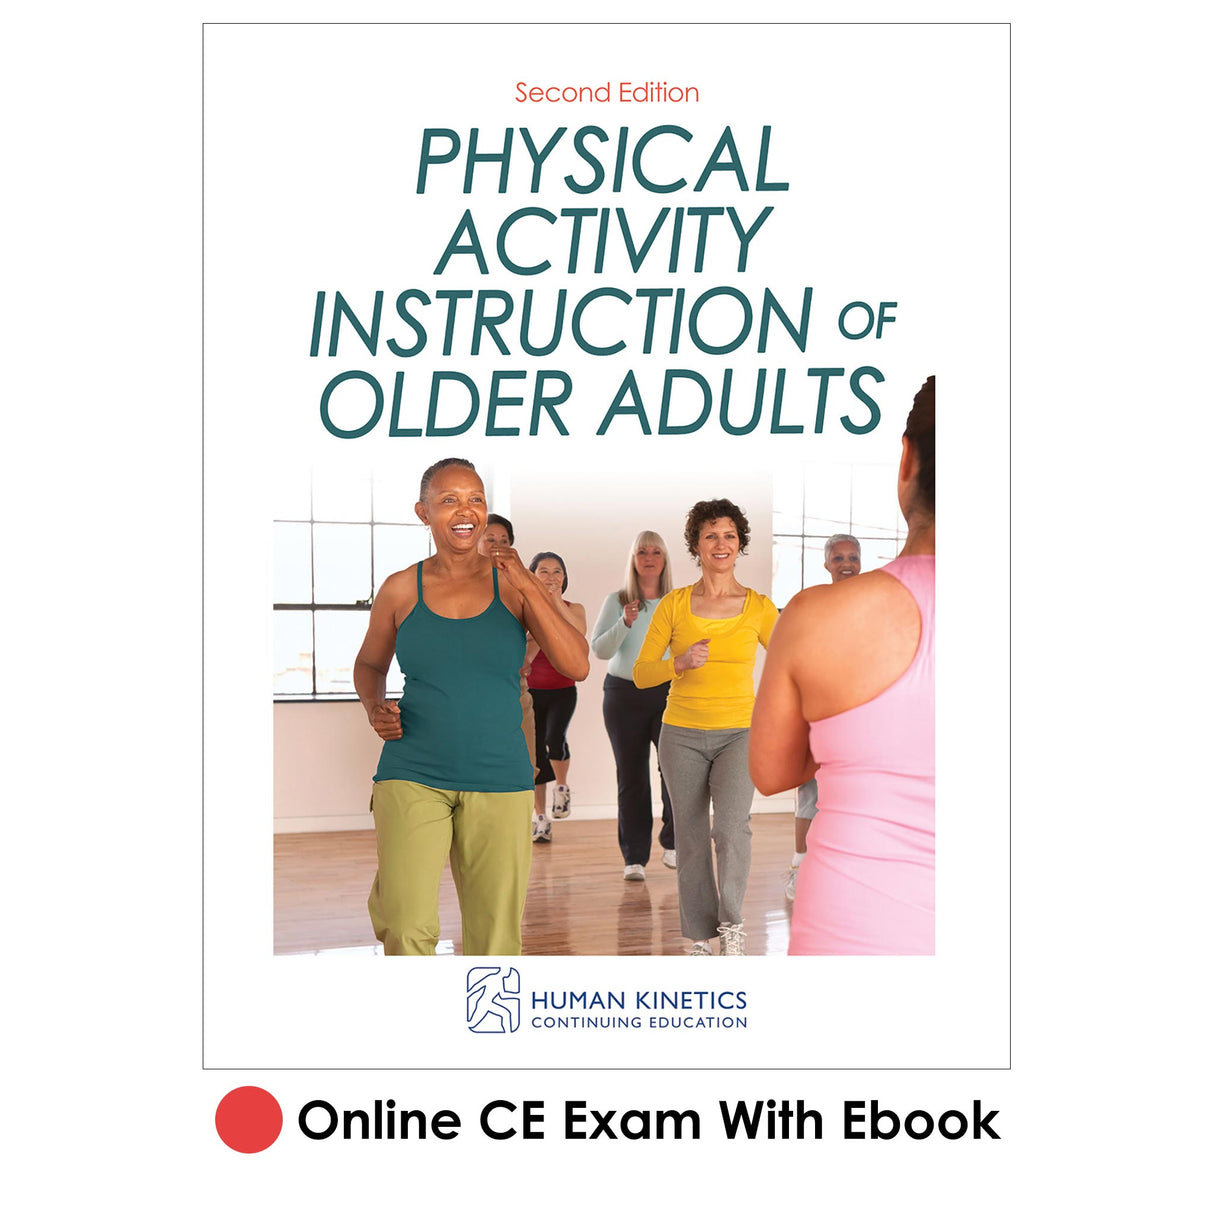 Physical Activity Instruction of Older Adults 2nd Edition Online CE Exam With Ebook